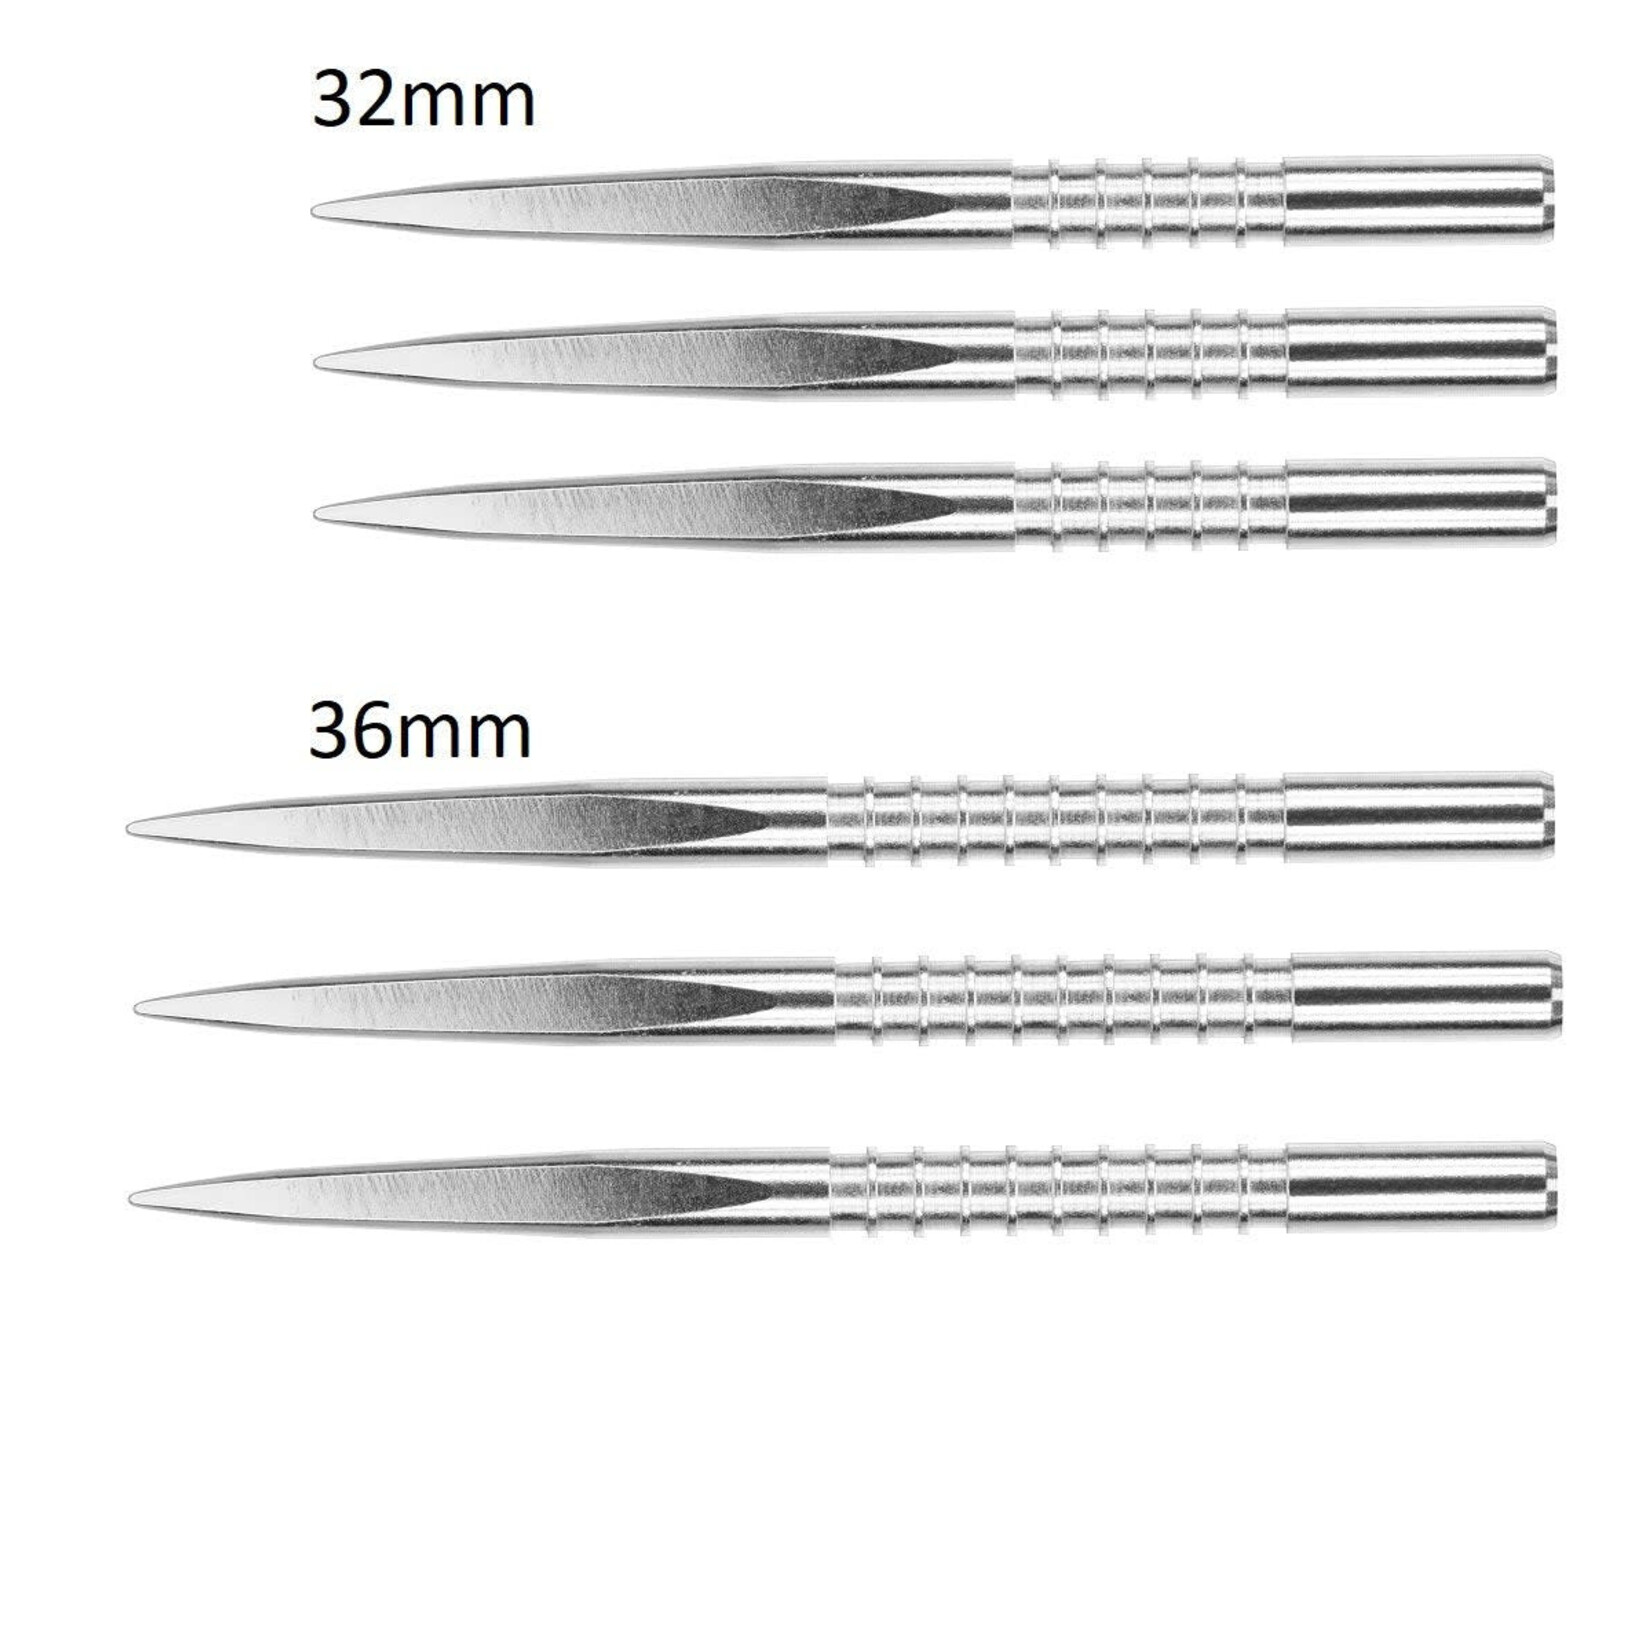 Target Darts Target FireEdge Grooved Replacement Steel Tip Points